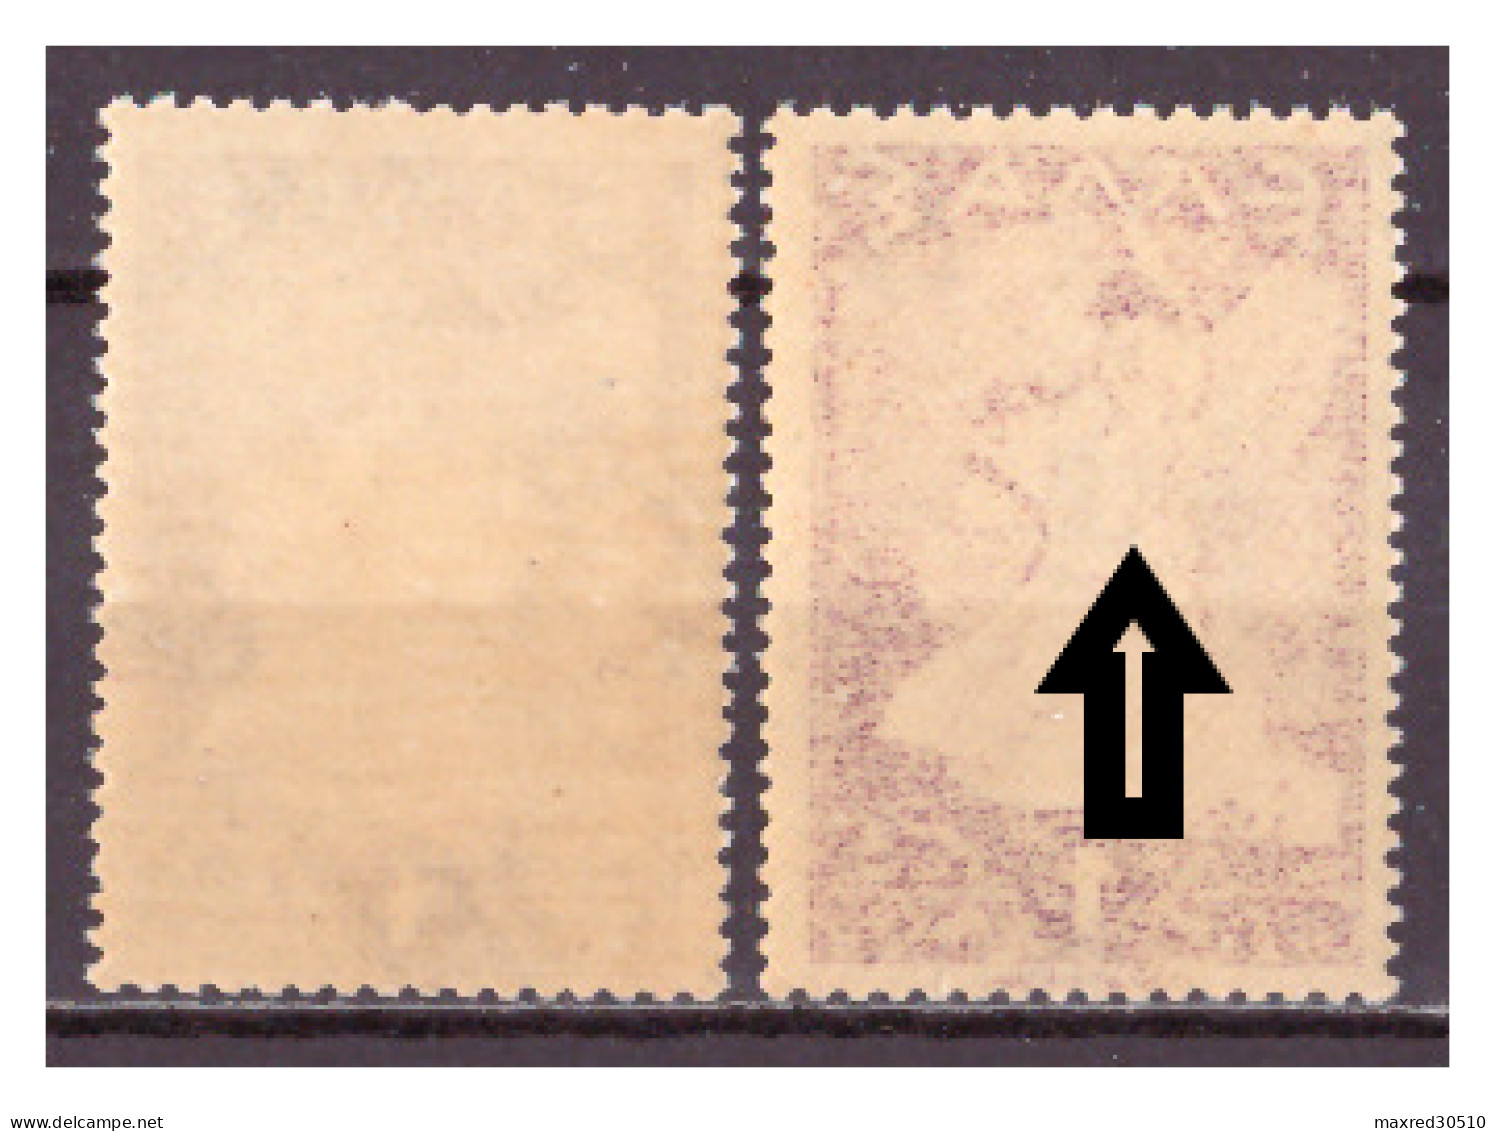 GREECE 1945 2X1L. OF THE "GLORY ISSUE" THE 2ND ONE (SEE ARROWS) WITH MIRROR PRINTING AT THE GUM ERROR MNH - Variedades Y Curiosidades